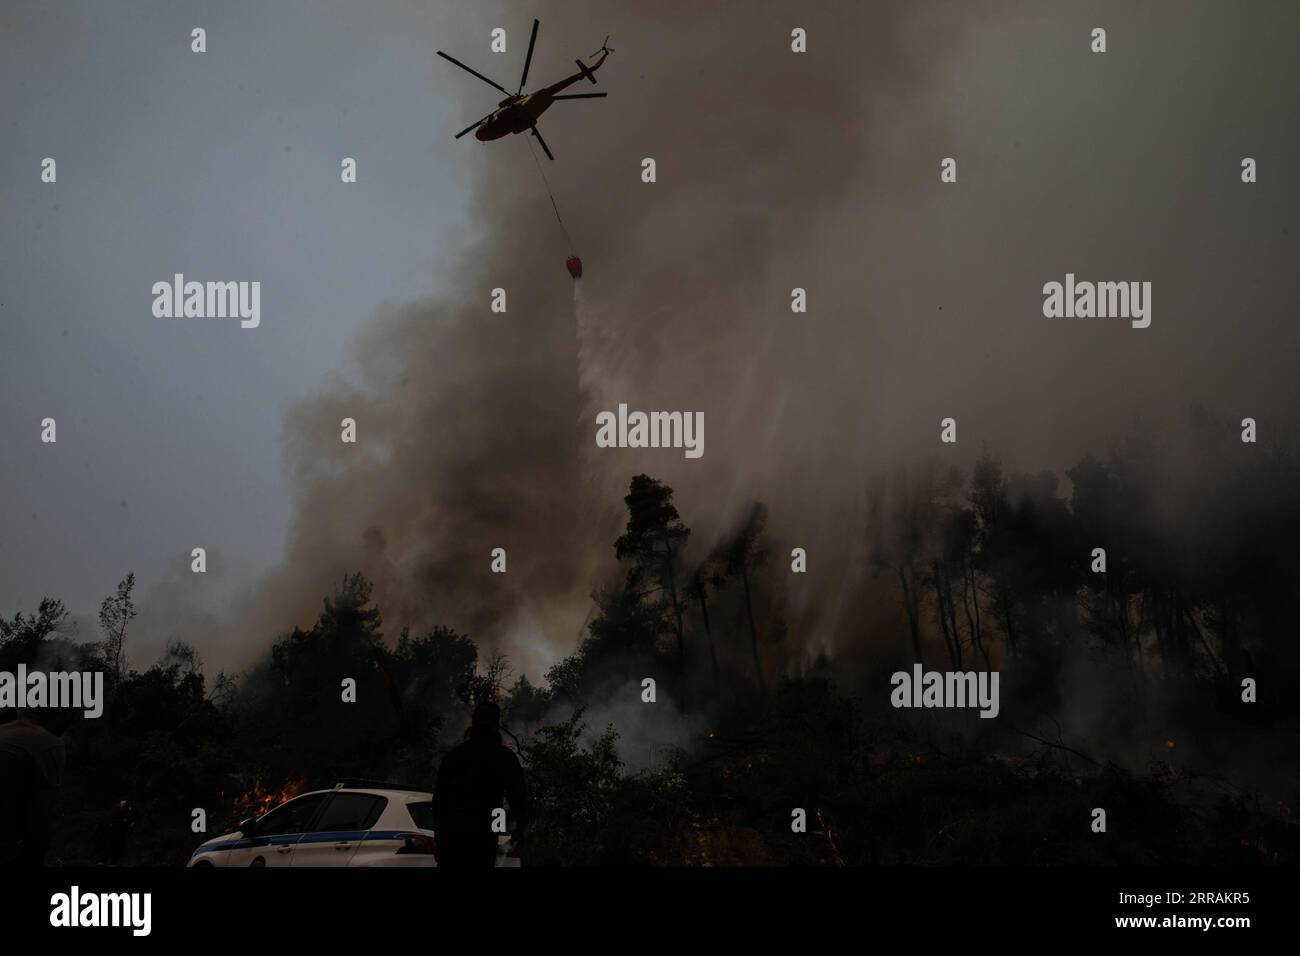 210806 -- EVIA, Aug. 6, 2021 -- A helicopter tries to extinguish a wildfire in the north of Evia island, Greece, on Aug. 5, 2021. Greek Prime Minister Kyriakos Mitsotakis said on Thursday evening that Greece is facing an extremely critical situation with multiple forest fires at the same time, while saving human lives is the government s top priority. Wildfires in the north of Athens leapt back to life on Thursday as Greece also faces flare-ups on the island of Evia, in Ancient Olympia in the northwestern Peloponnese and in other parts of the country. TO GO WITH Greek PM says saving human live Stock Photo